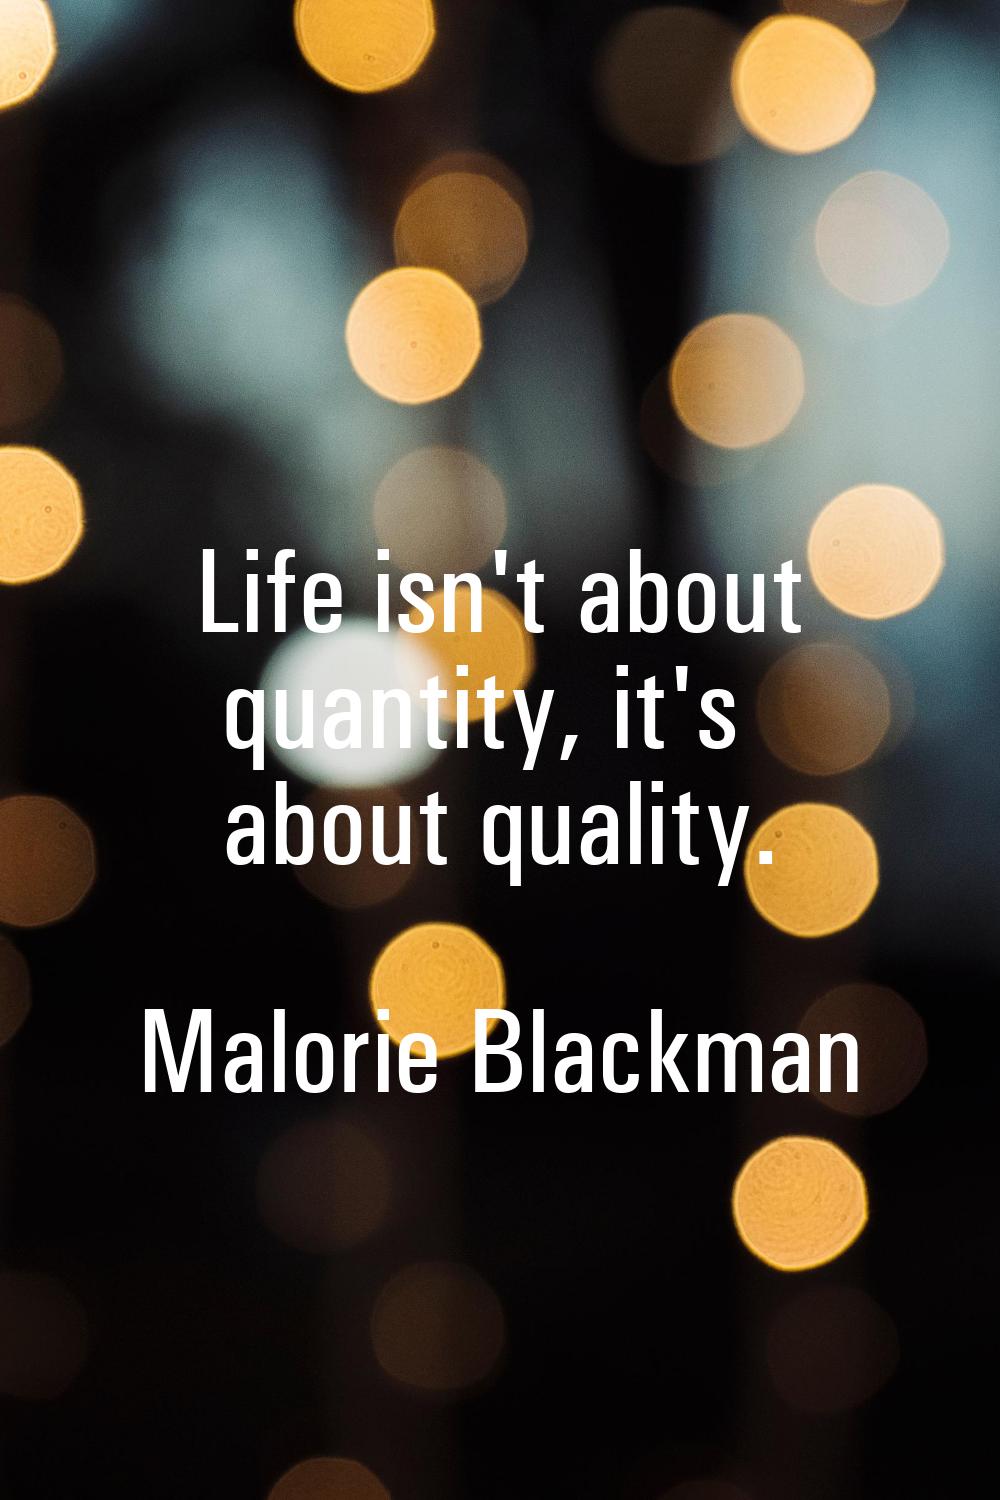 Life isn't about quantity, it's about quality.